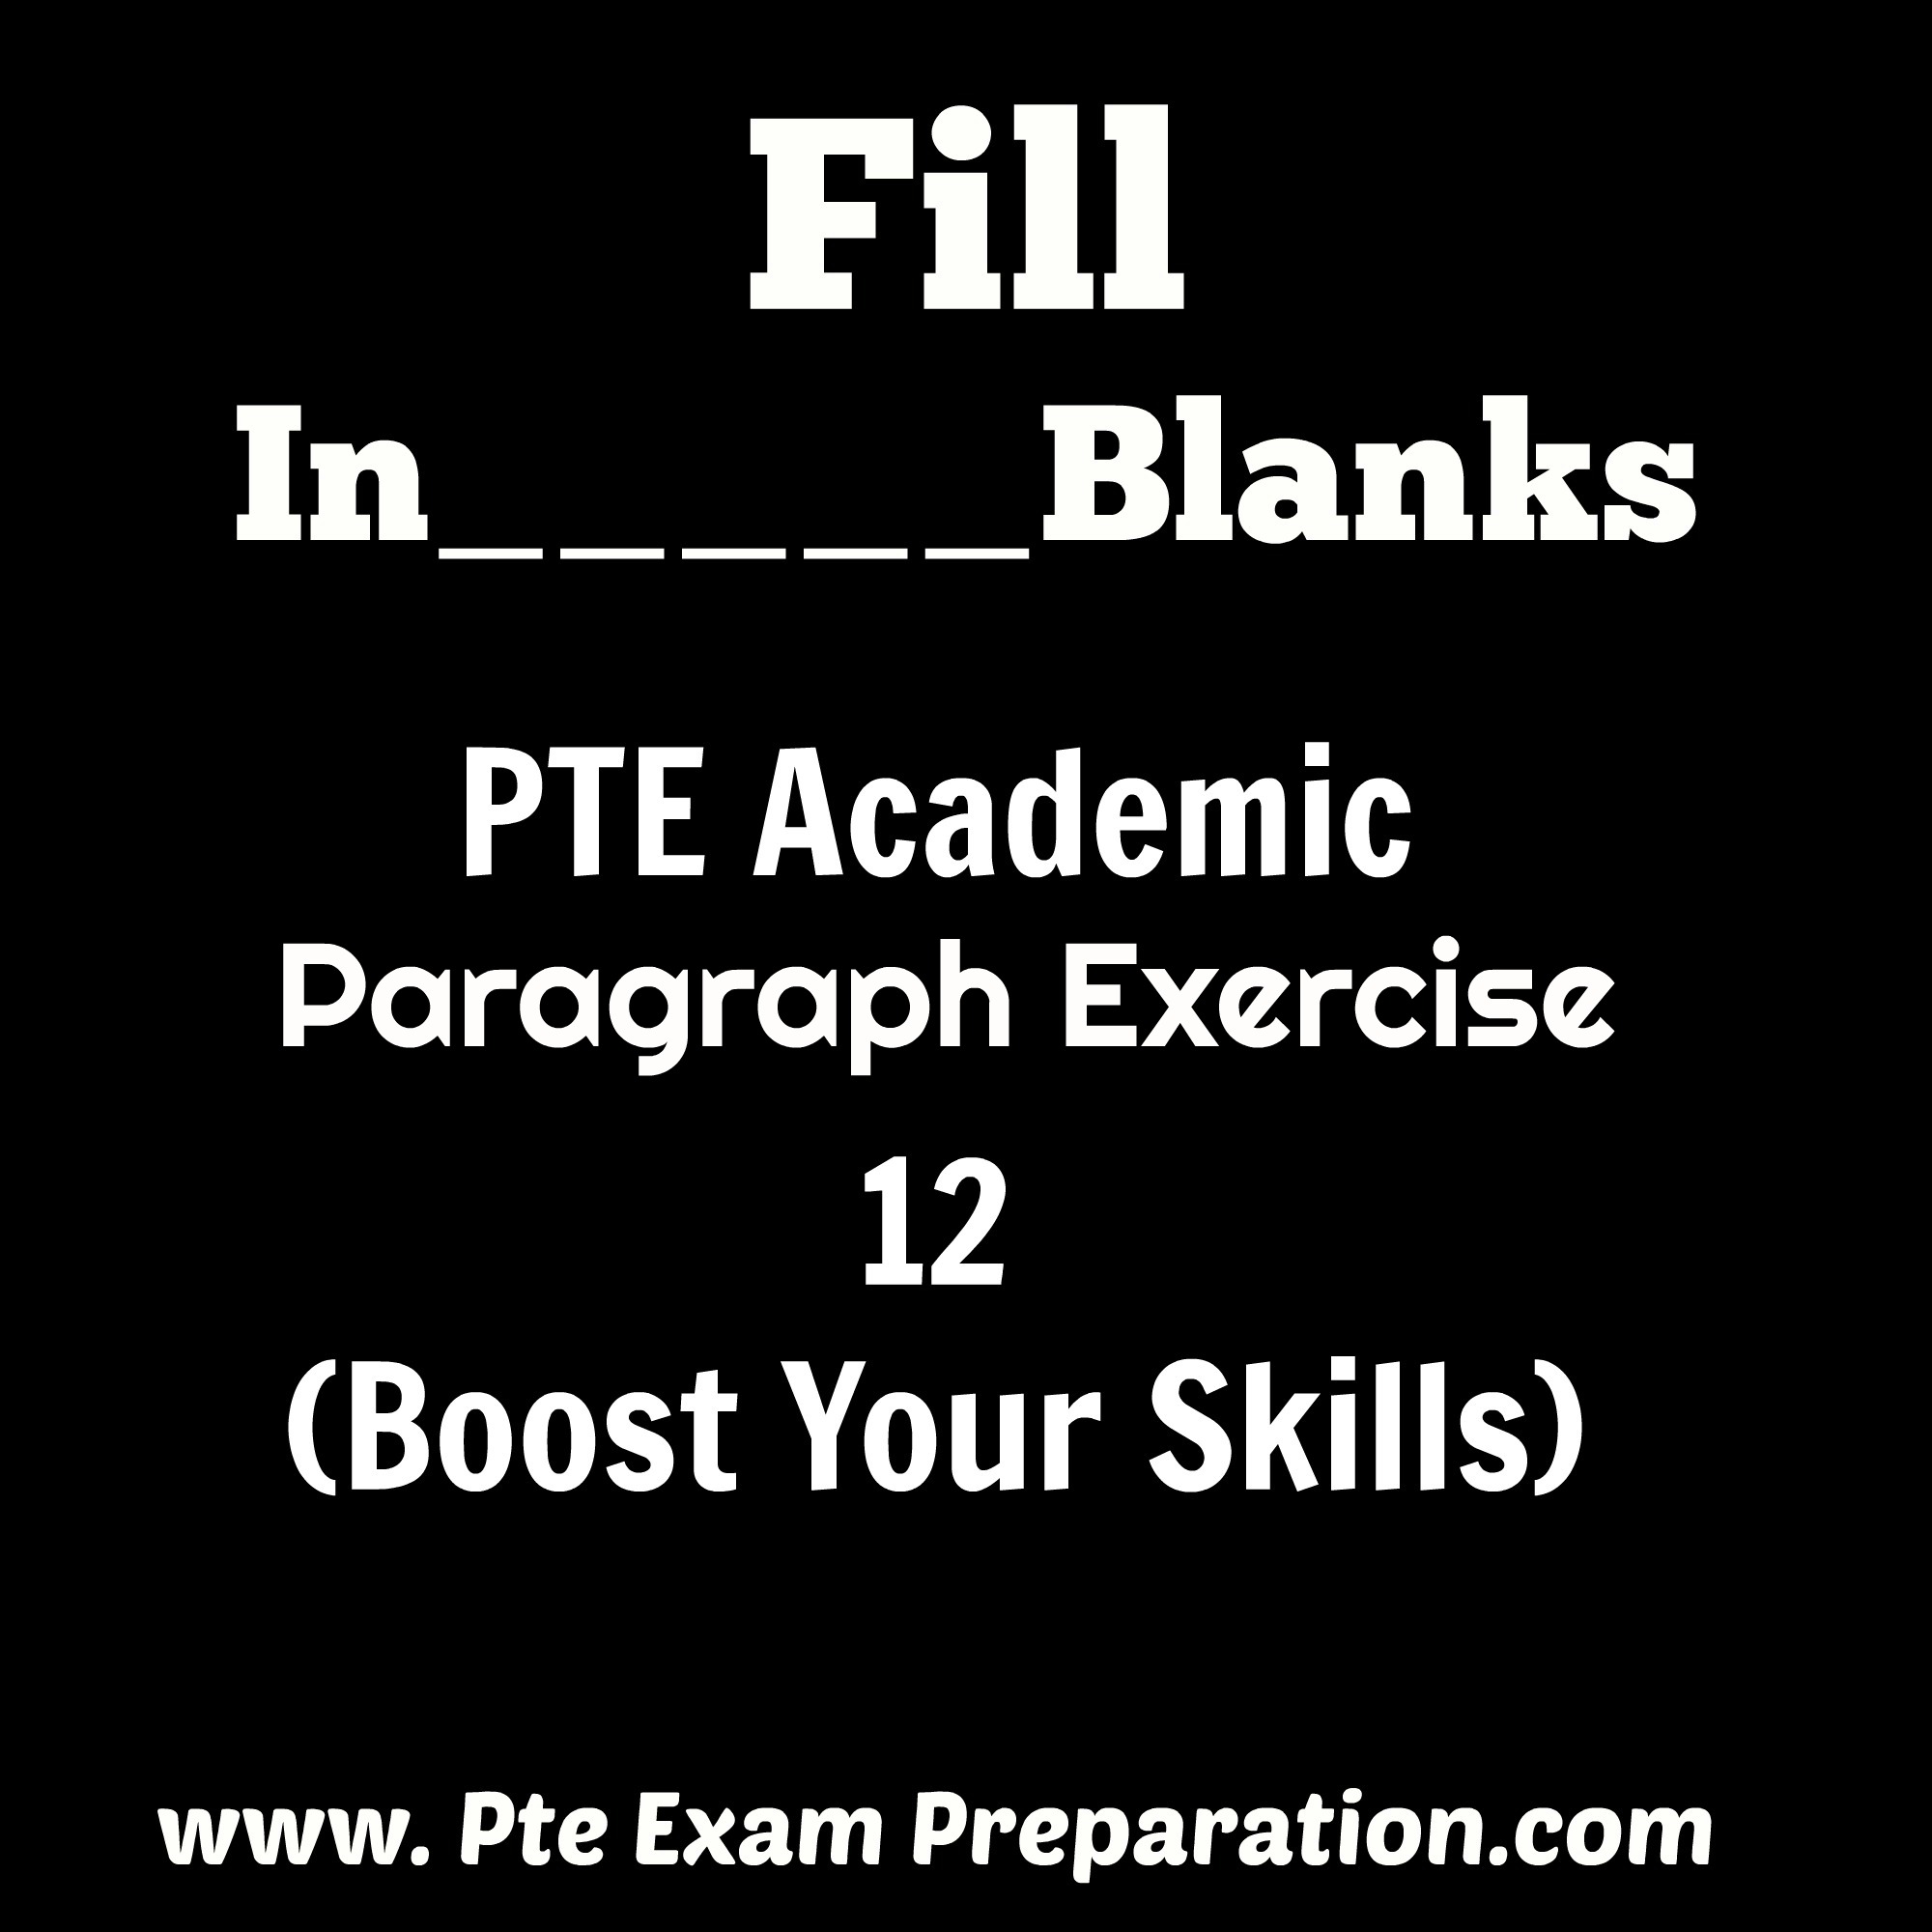 PTE Academic Fill In The Blanks Paragraph Exercises 12 (Boost Your Skills)